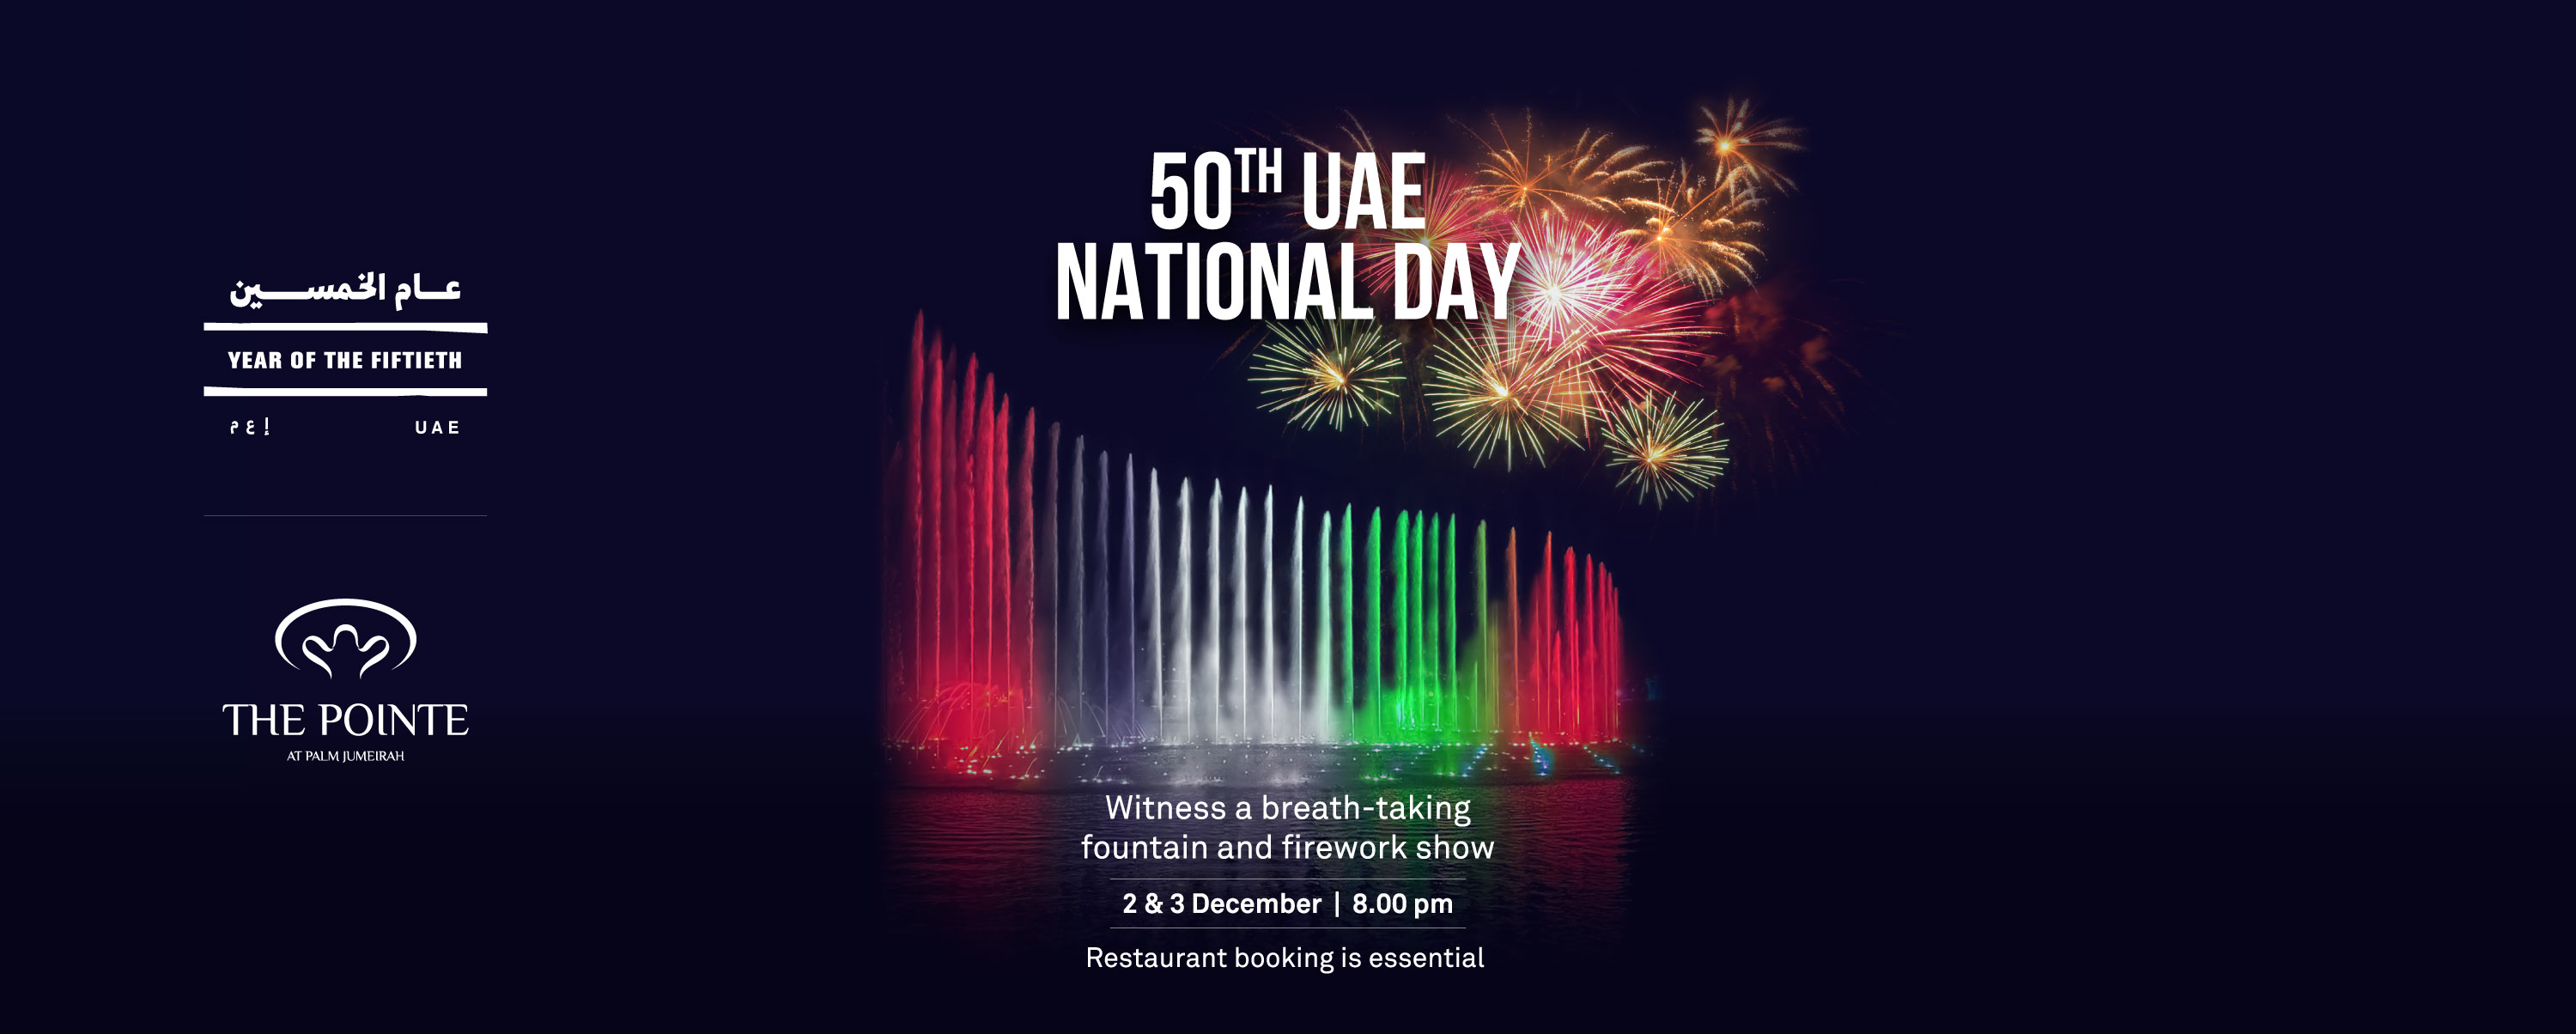 50TH UAE NATIONAL DAY AT PALM JUMEIRAH, DUBAI – FIREWORKS AND FOUNTAIN SHOWS
